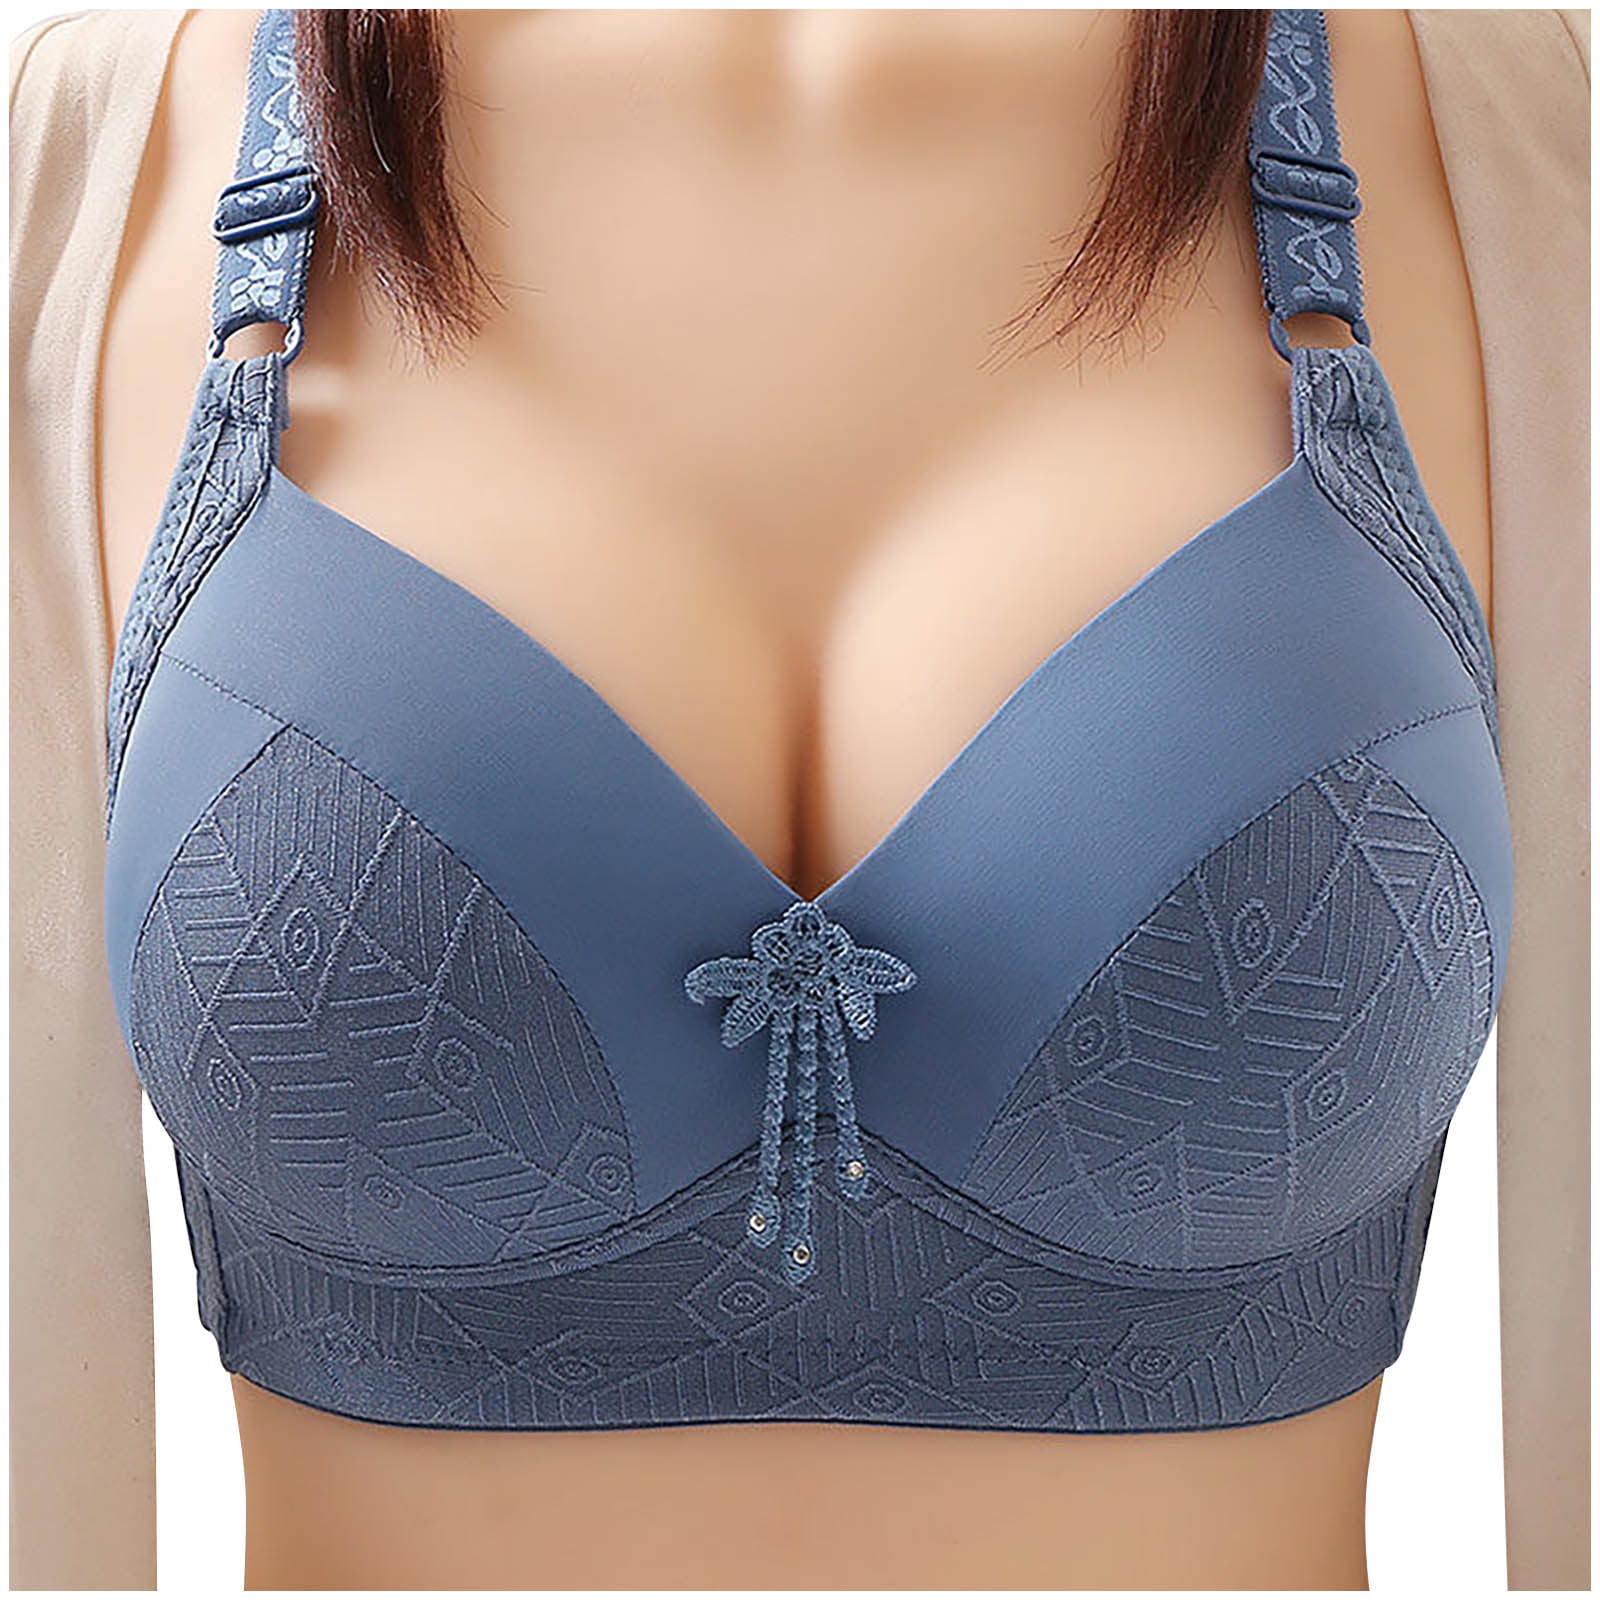 WQJNWEQ Clearance Wireless Bras for Women Support Side Retraction No Steel  Ring Underwear Strap Type Thin Mould Cup Breathable Bra 